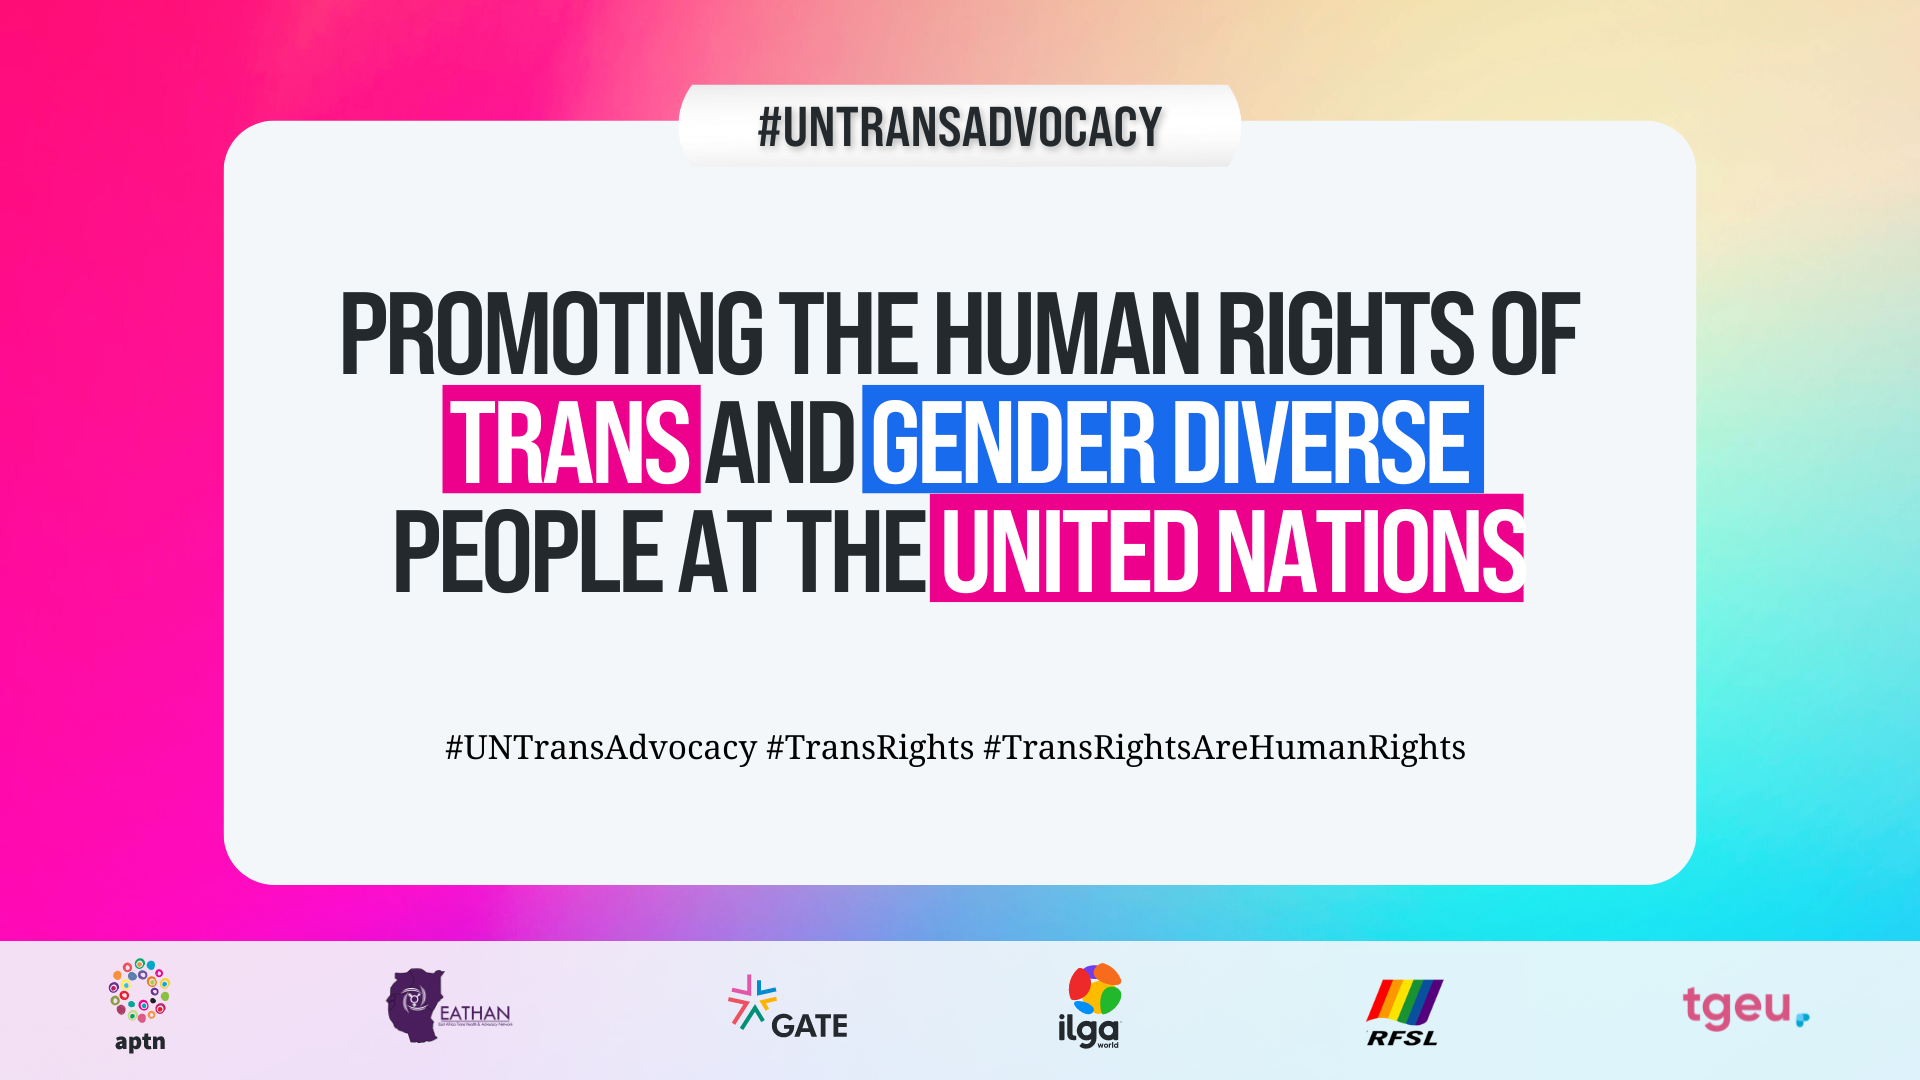 The image has a background in a gradient of various colours, and text reading "Promoting the human rights of trans and gender diverse people at the United Nations". The image is prepared for an explainer article about UN Trans Advocacy Week